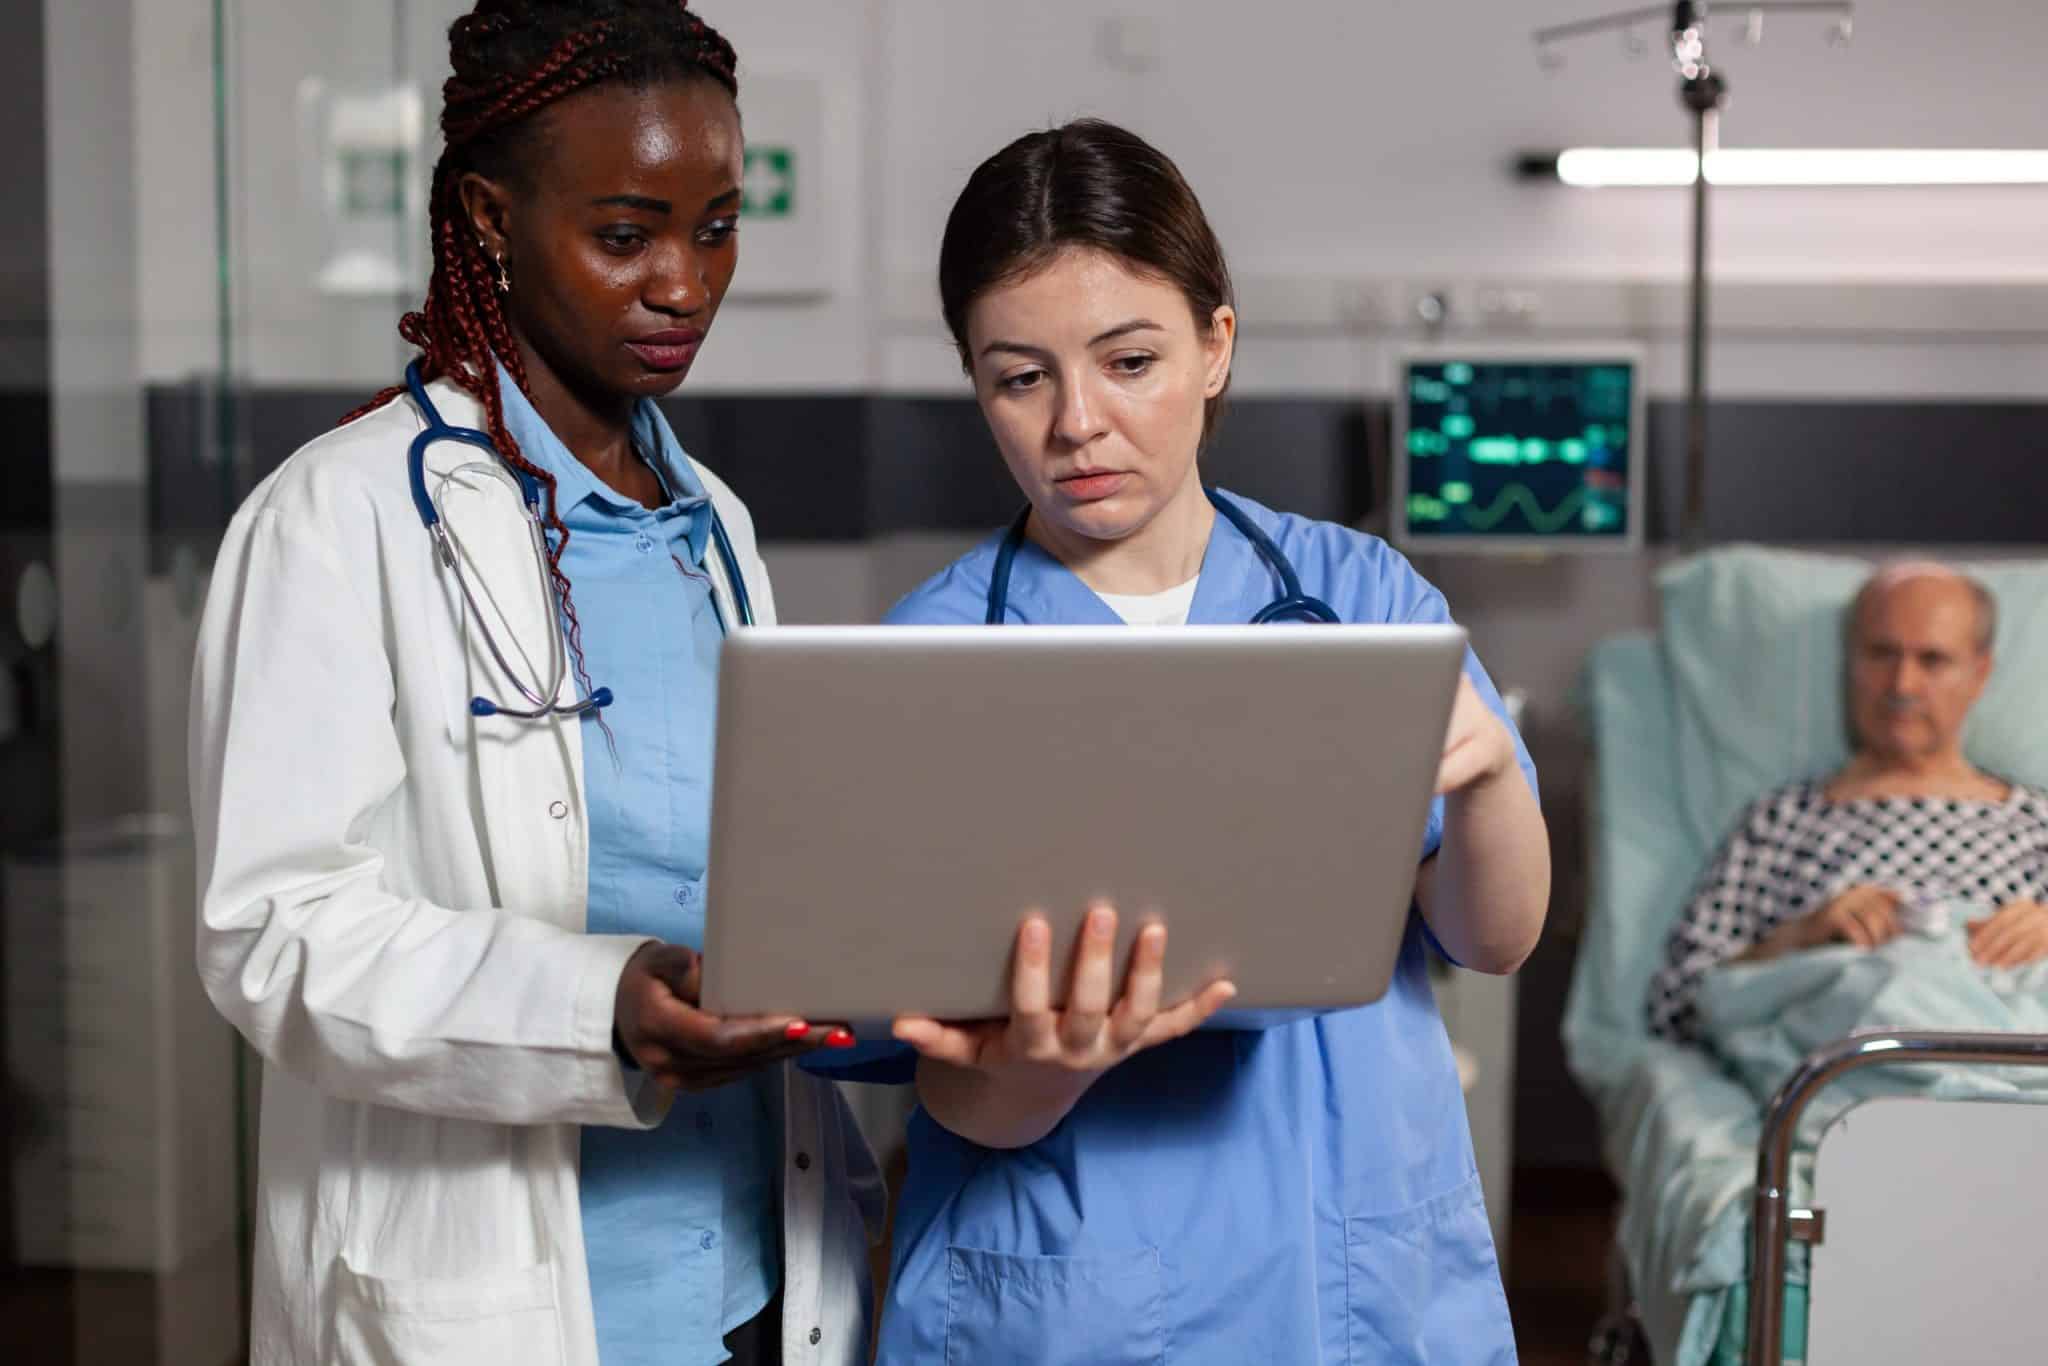 Doctor and nurse discuss results on a laptop with a blurred patient in the background